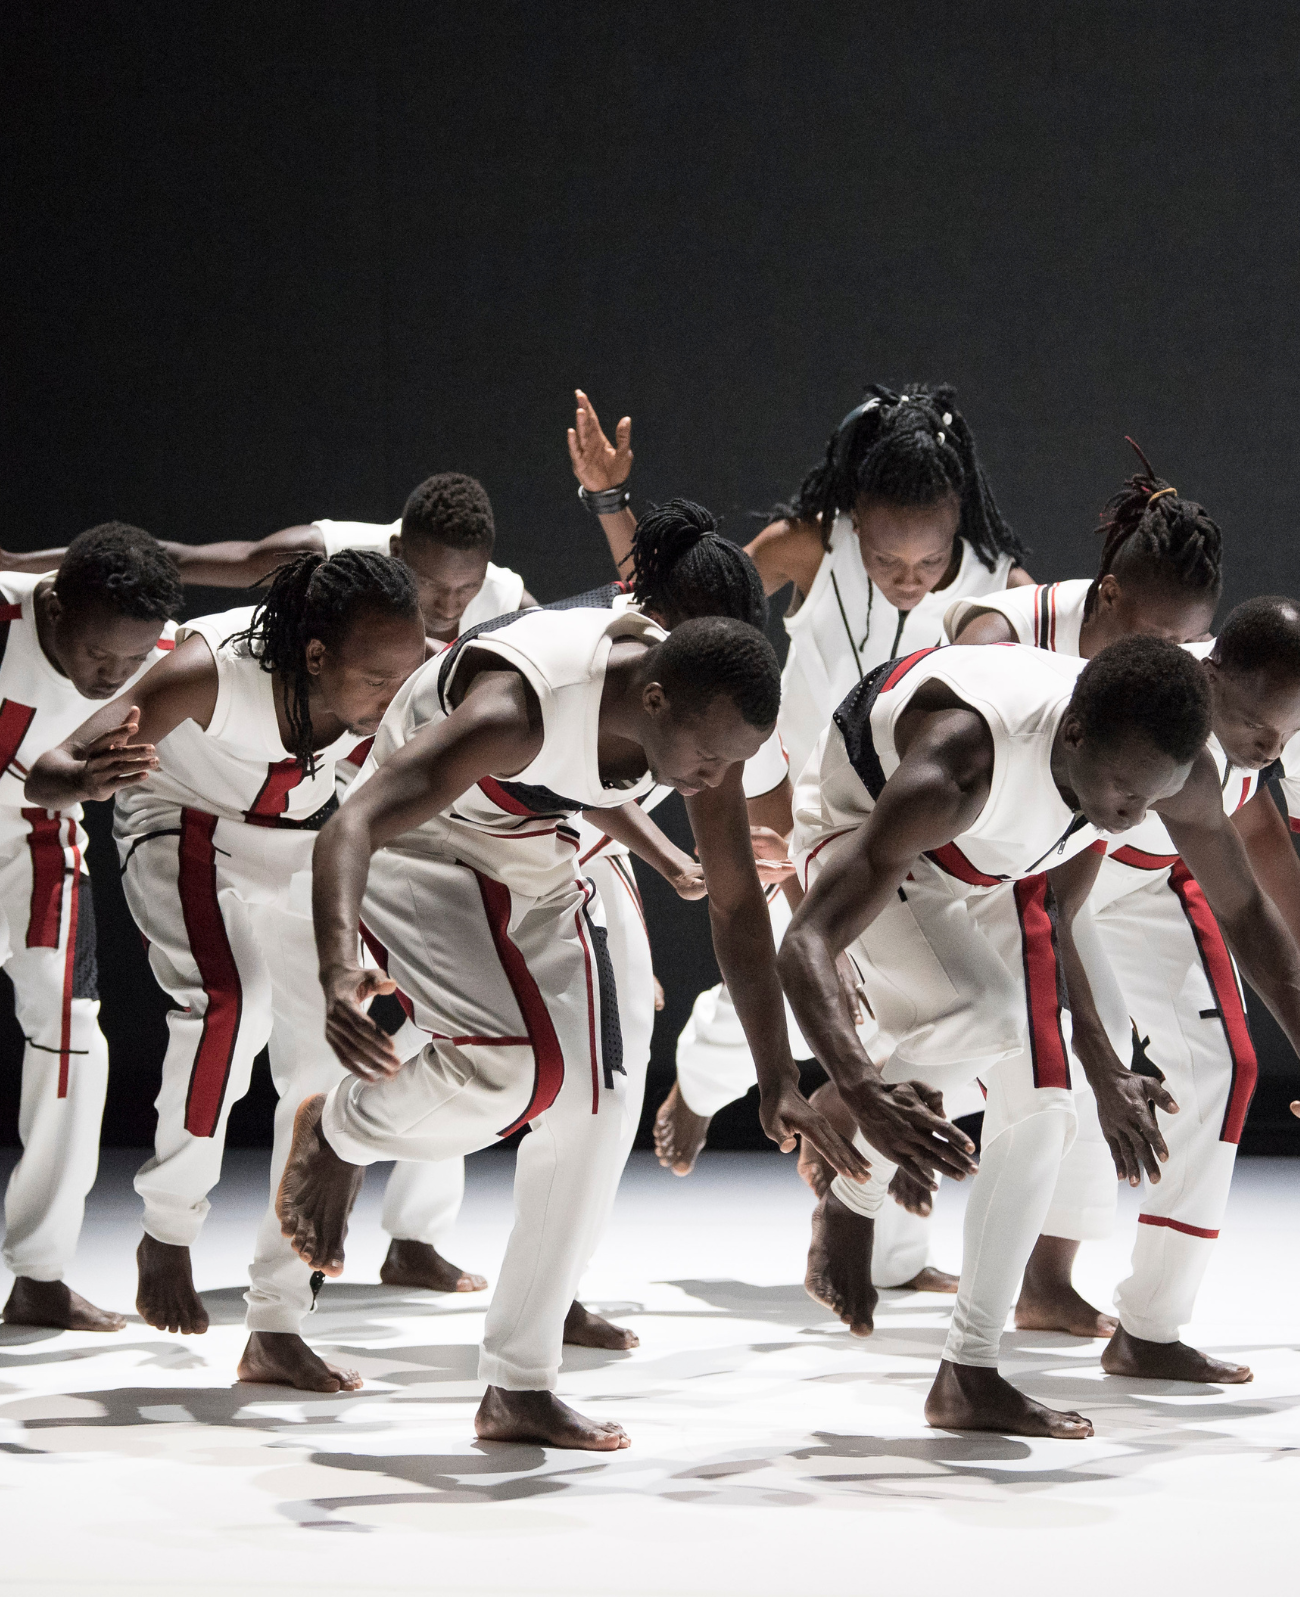 9 African dancers dressed in white with red and black trim move rhythmically in unison